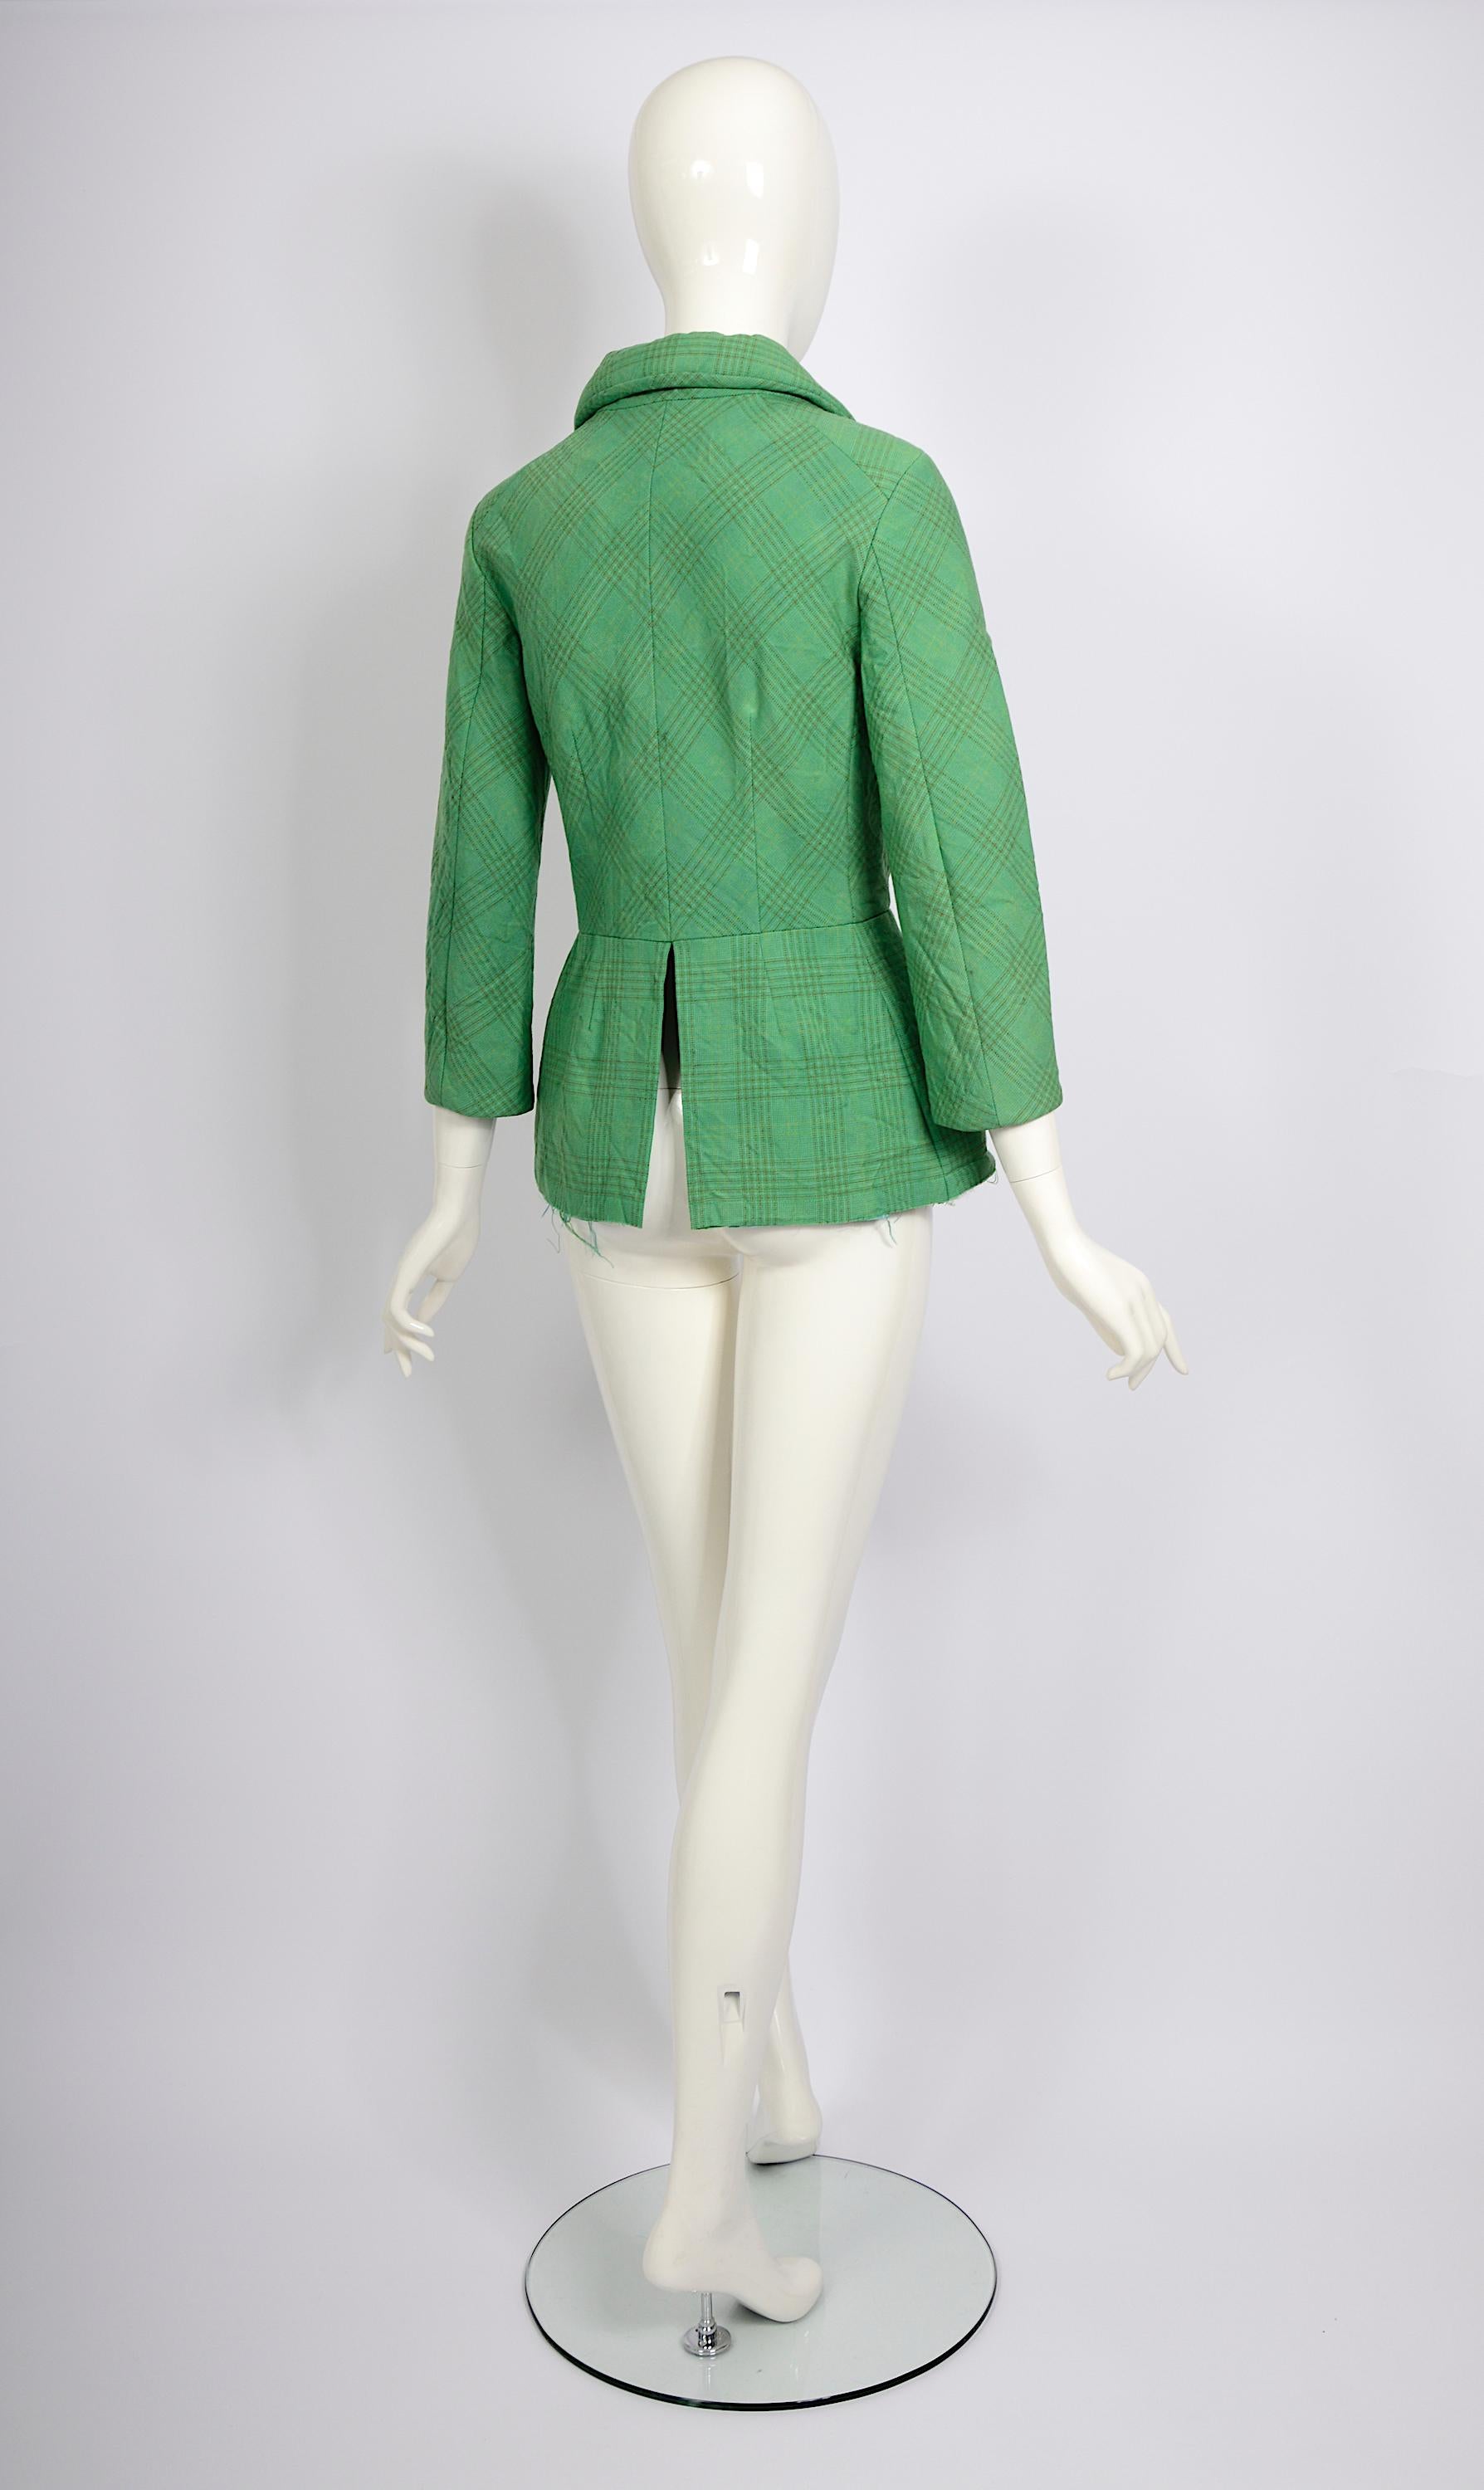 Comme des Garçons by Junya Watanabe vintage FW 2004 green padded basque jacket   For Sale 3